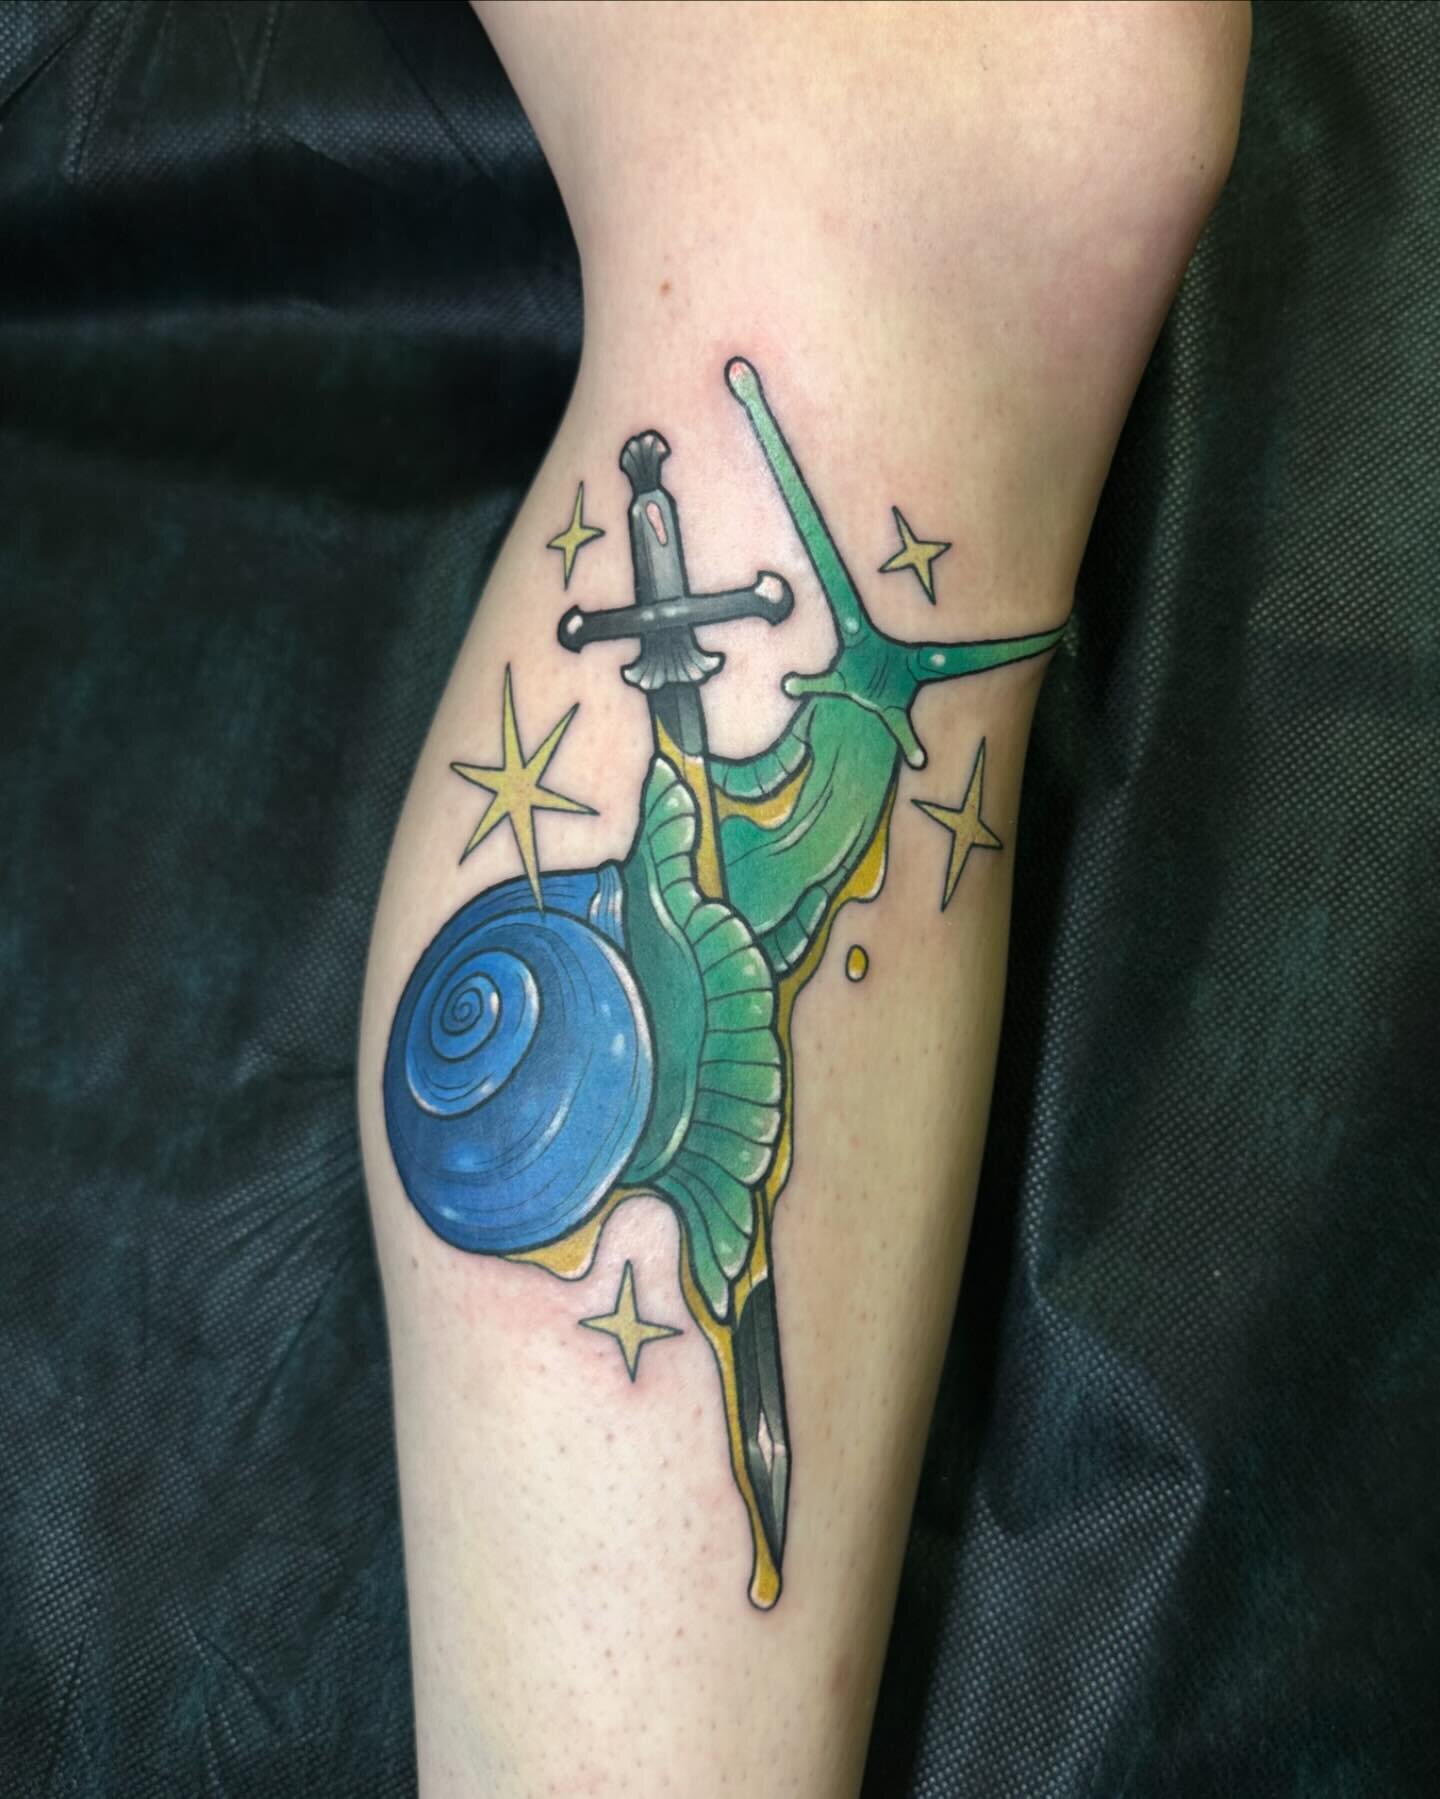 Another sword snail for my sweet client Rory🗡️
Thanks for collecting rad tattoos from me!!✨
.
.
.
#Tattoo #ladytattooers #ohiotattooers #columbustattooers #whiteraventattoostudio #swordtattoo #snailtattoo #fantasytattoo #snail #howeirdflash #